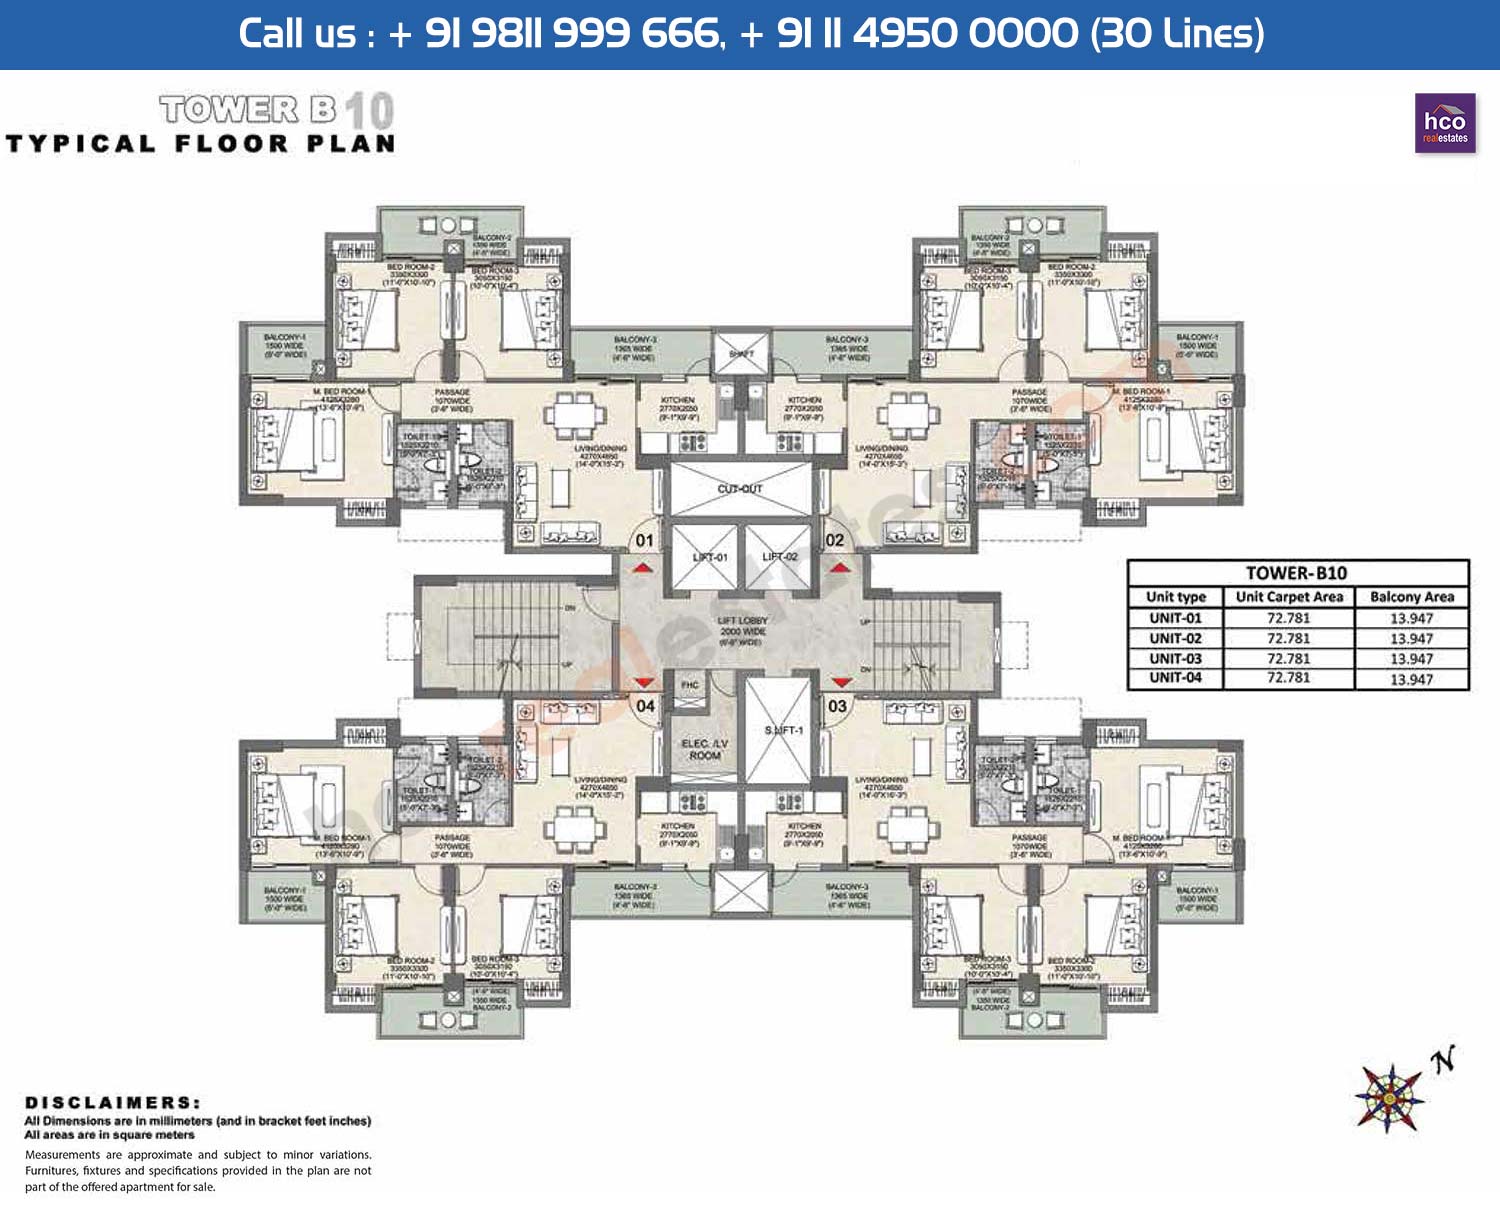 Tower B10 Typical Floor Plan